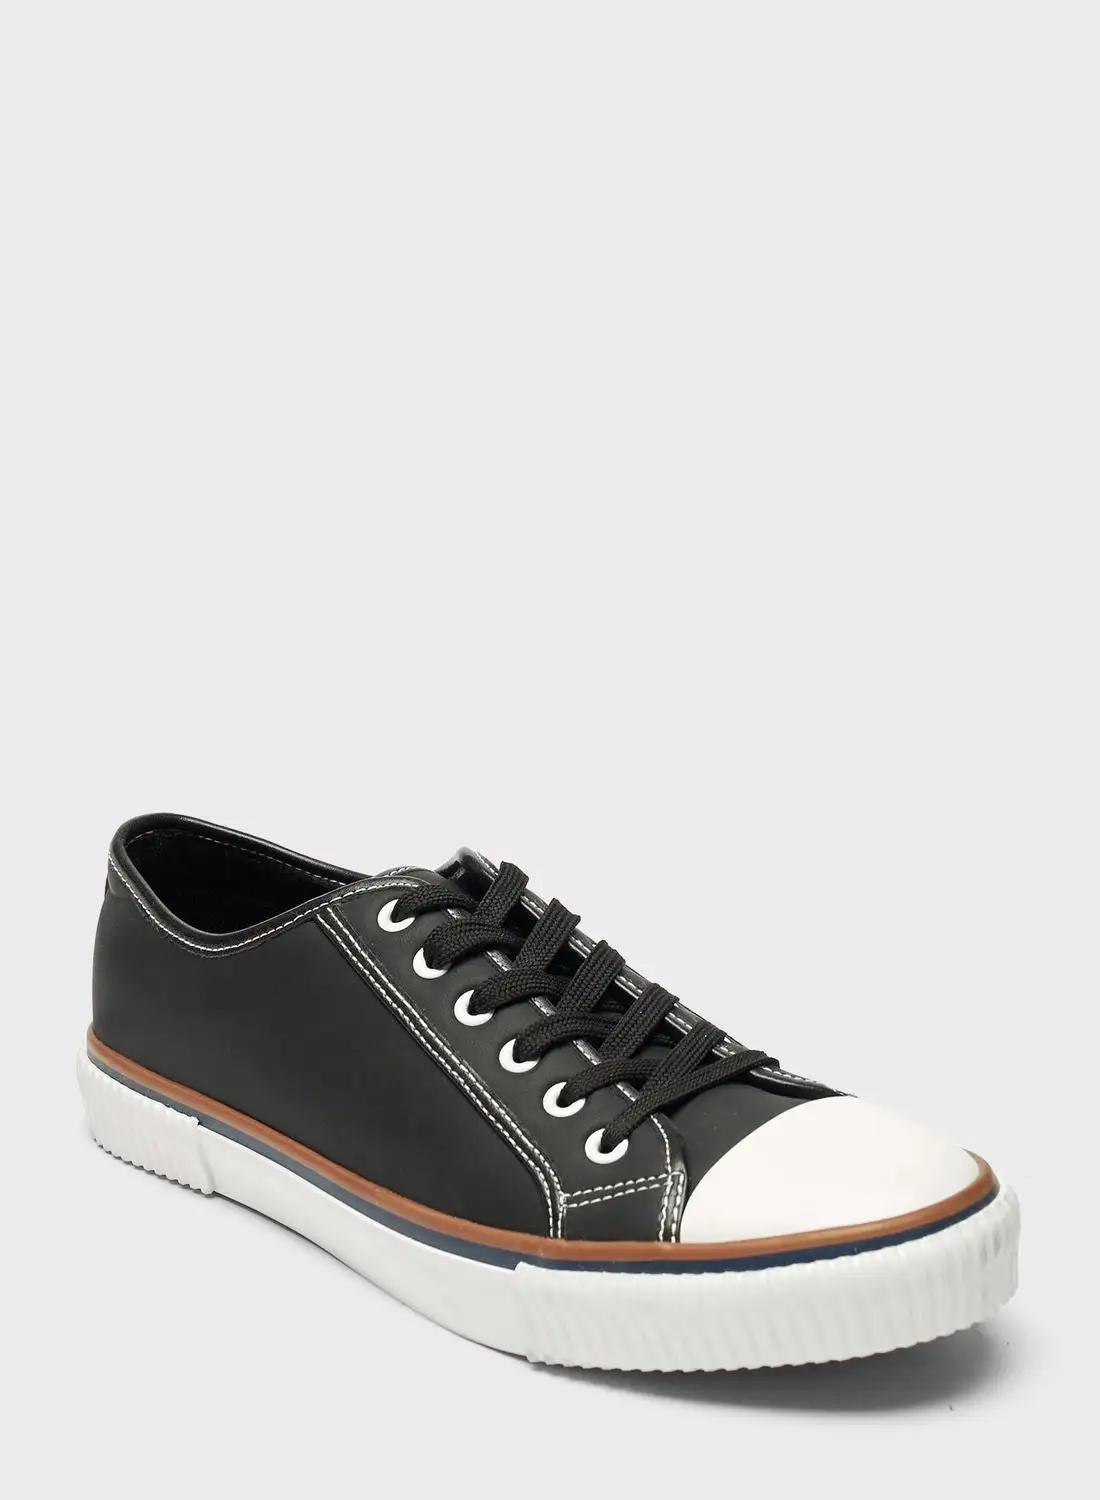 LBL by Shoexpress Casual Low Top Sneakers